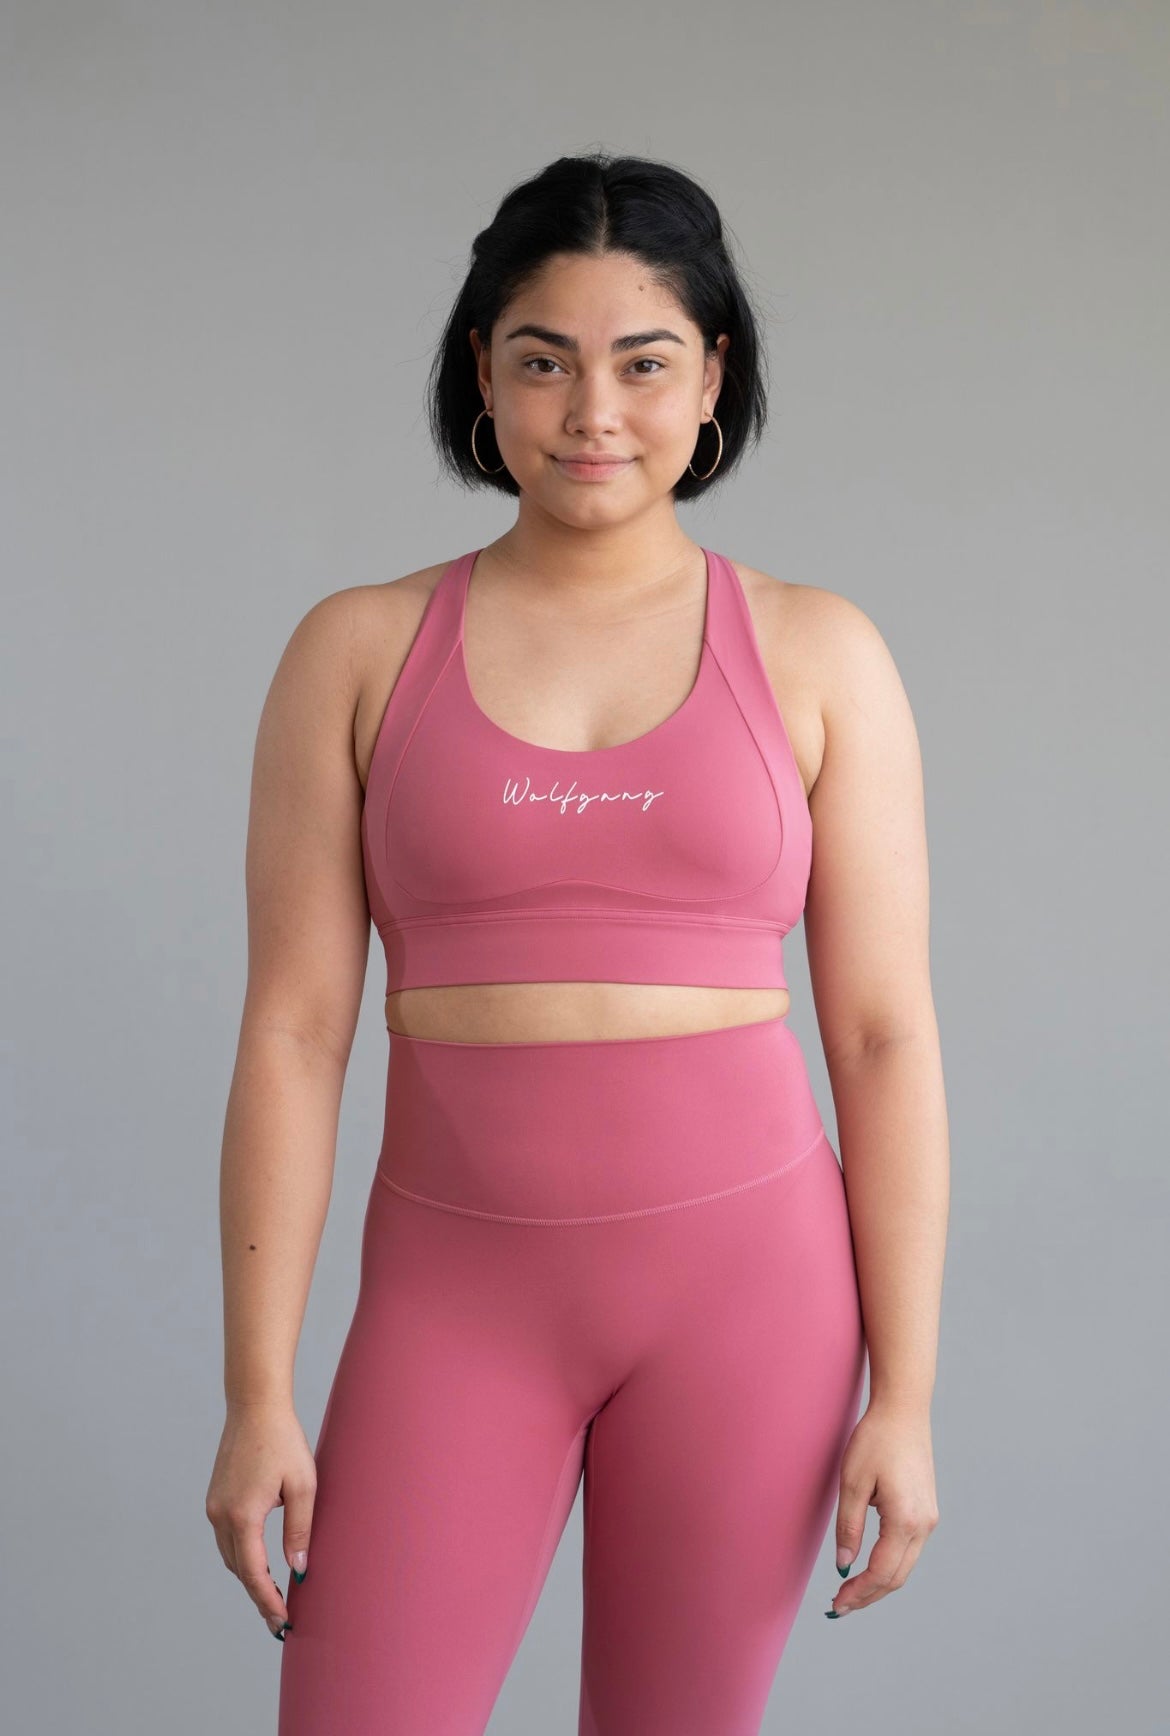 Workout fit Air Support Bra 34DDD in Pink Mist/White Opal and Fast and Free  shirts size 6 in Pink Taupe - this is the best high support bra I've ever  had and